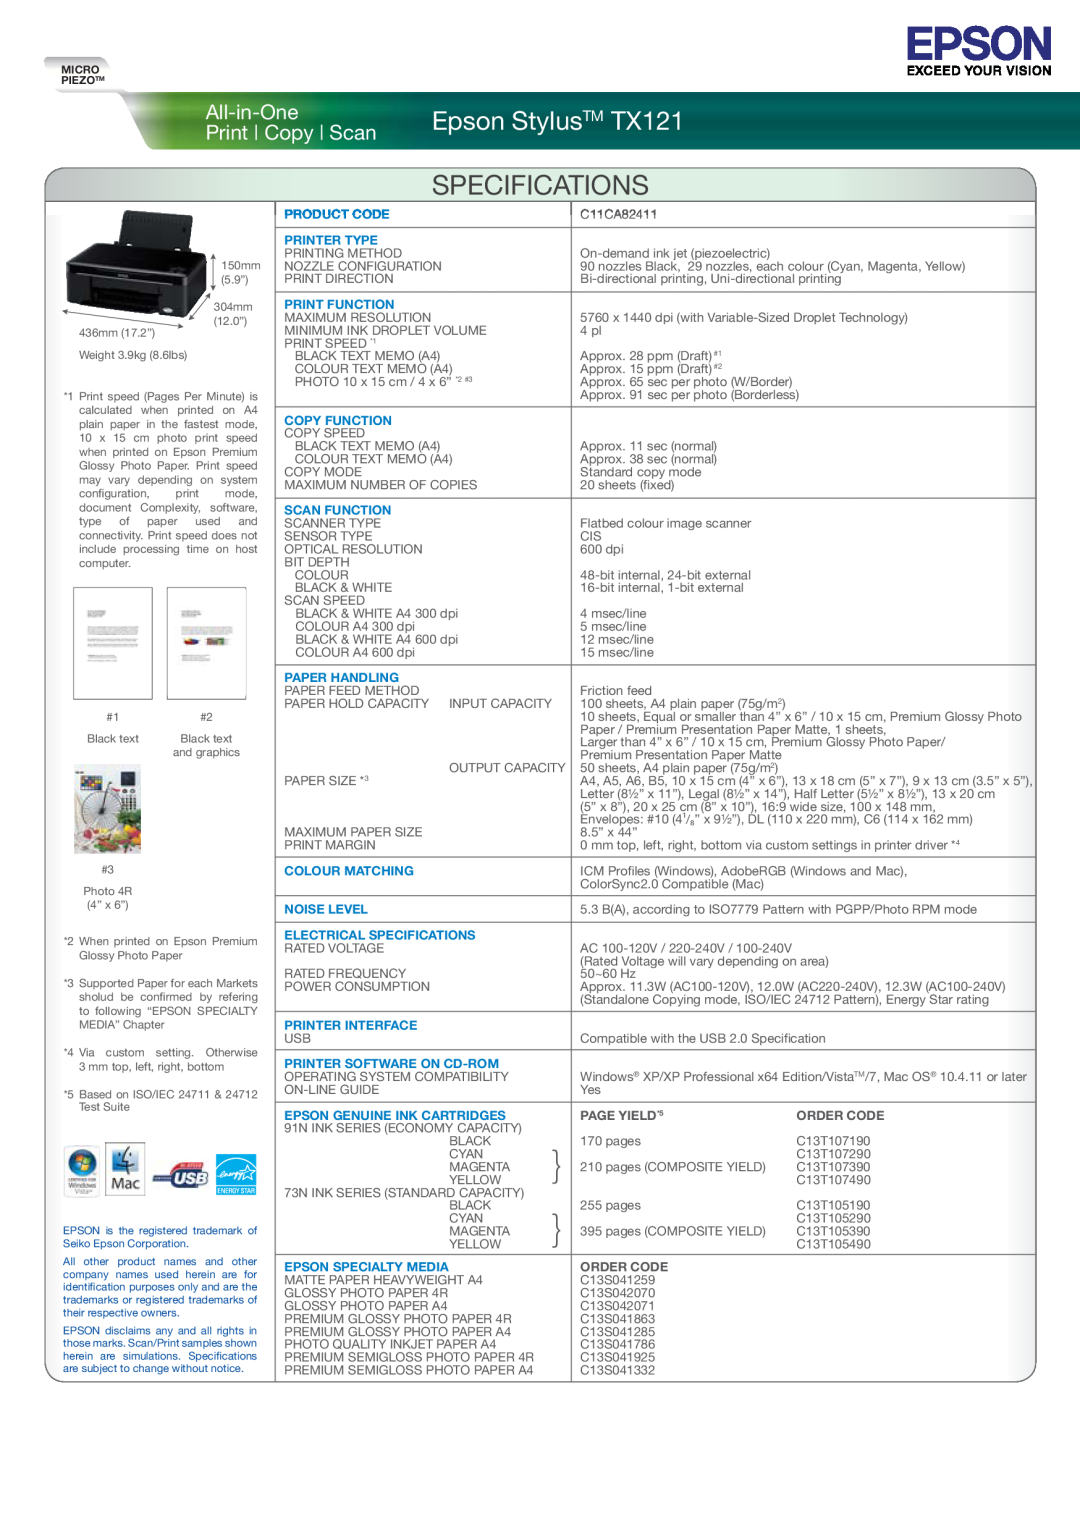 Epson manual All-in-One, Print Copy Scan, Specifications, Epson Stylus TM TX121, PAGE YIELD*5, Order Code 